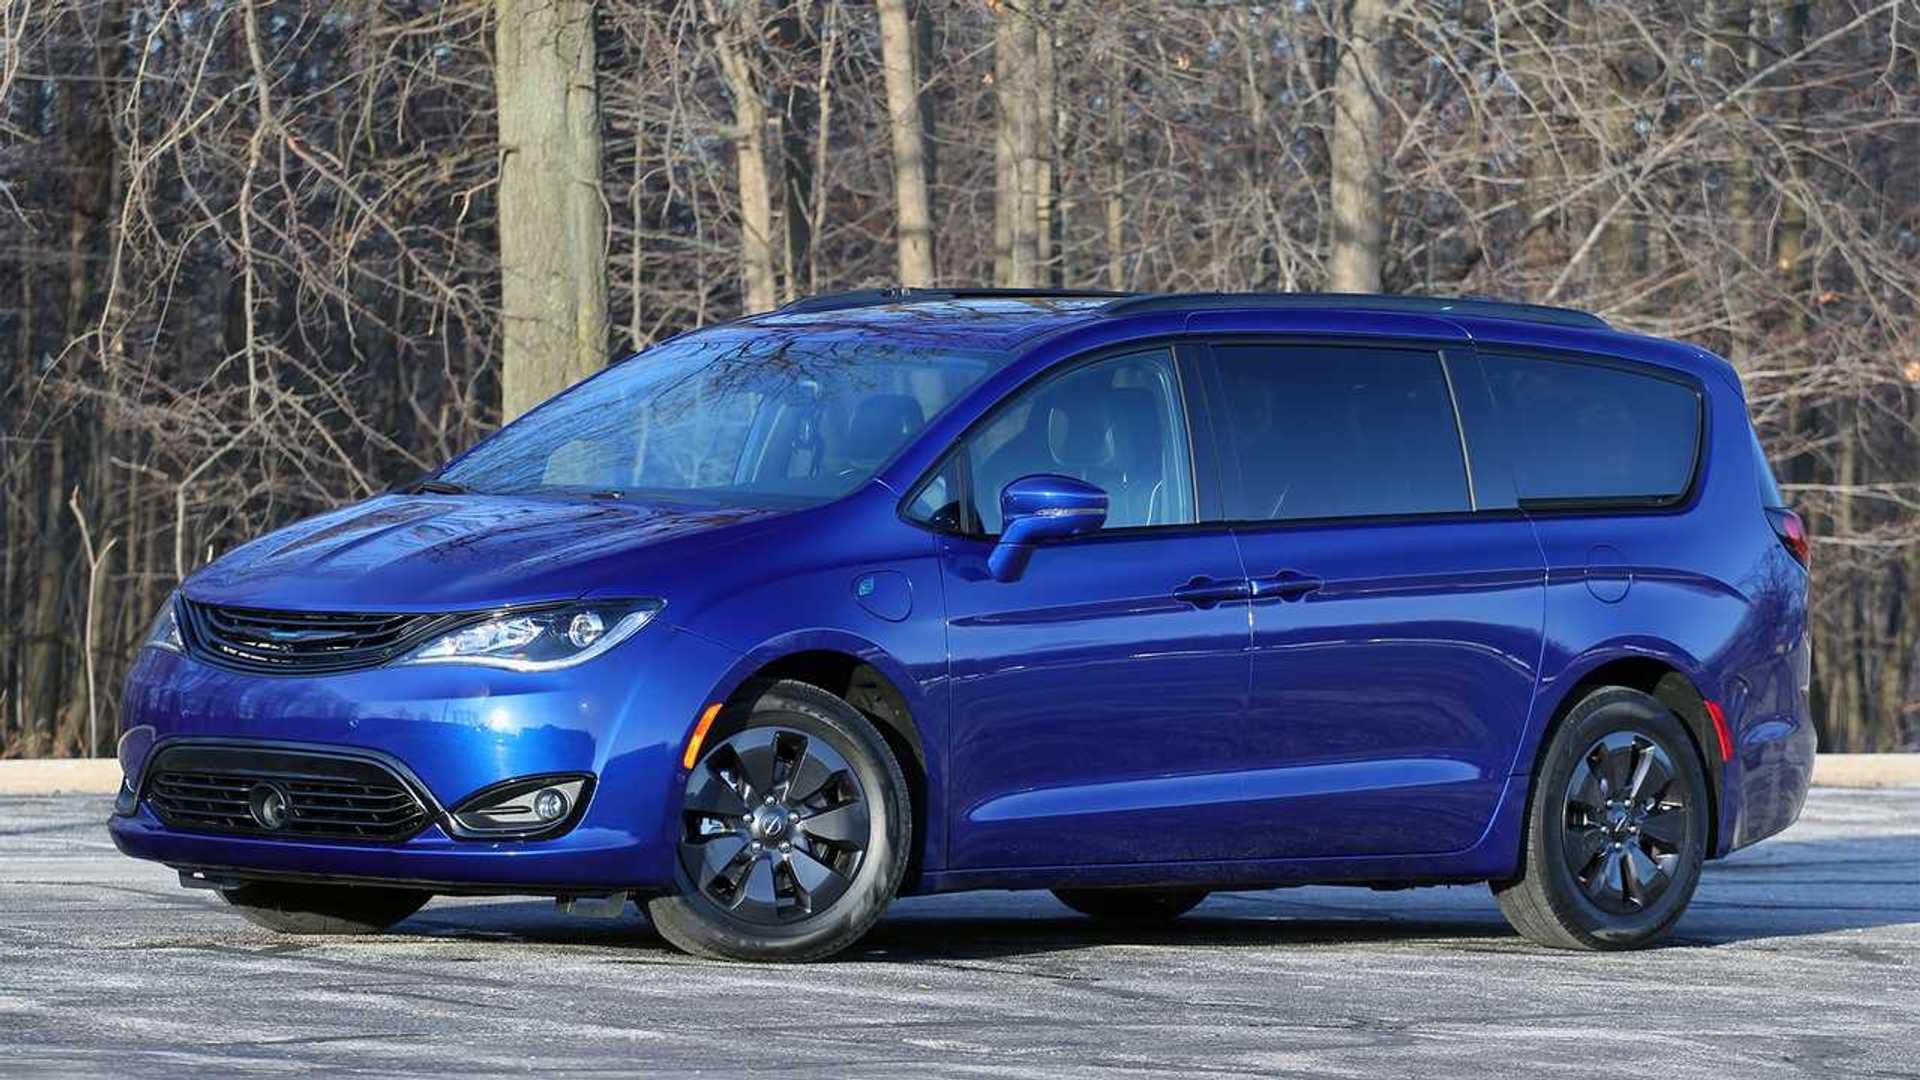 Chrysler Pacifica Hybrid News and Reviews | InsideEVs